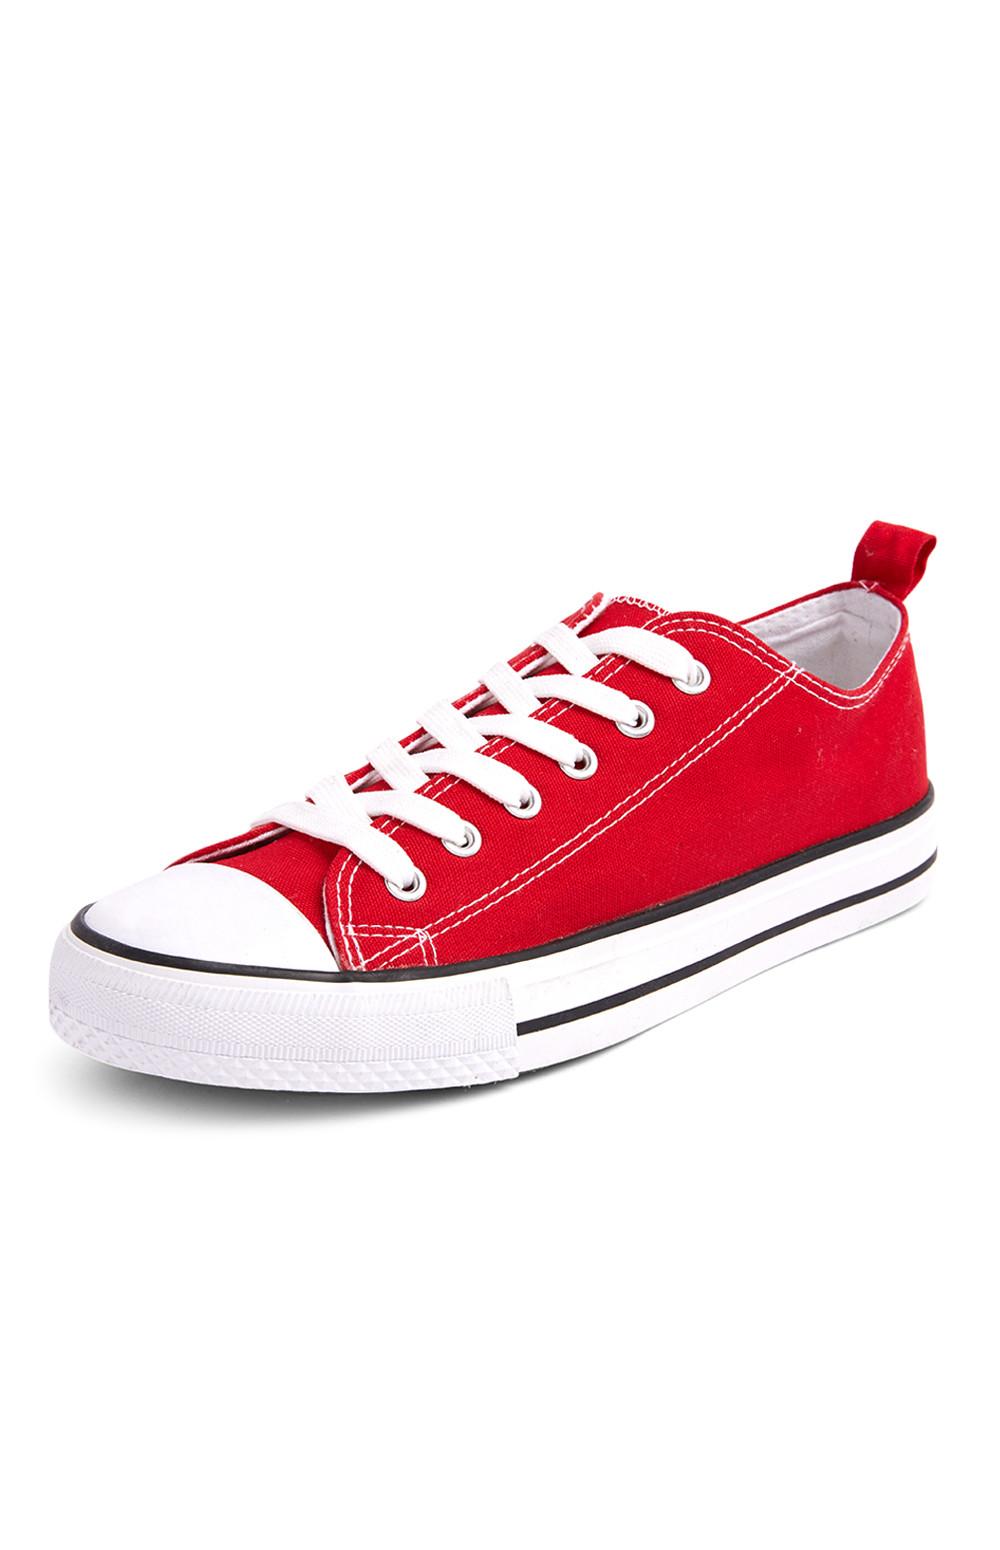 primark converse style trainers